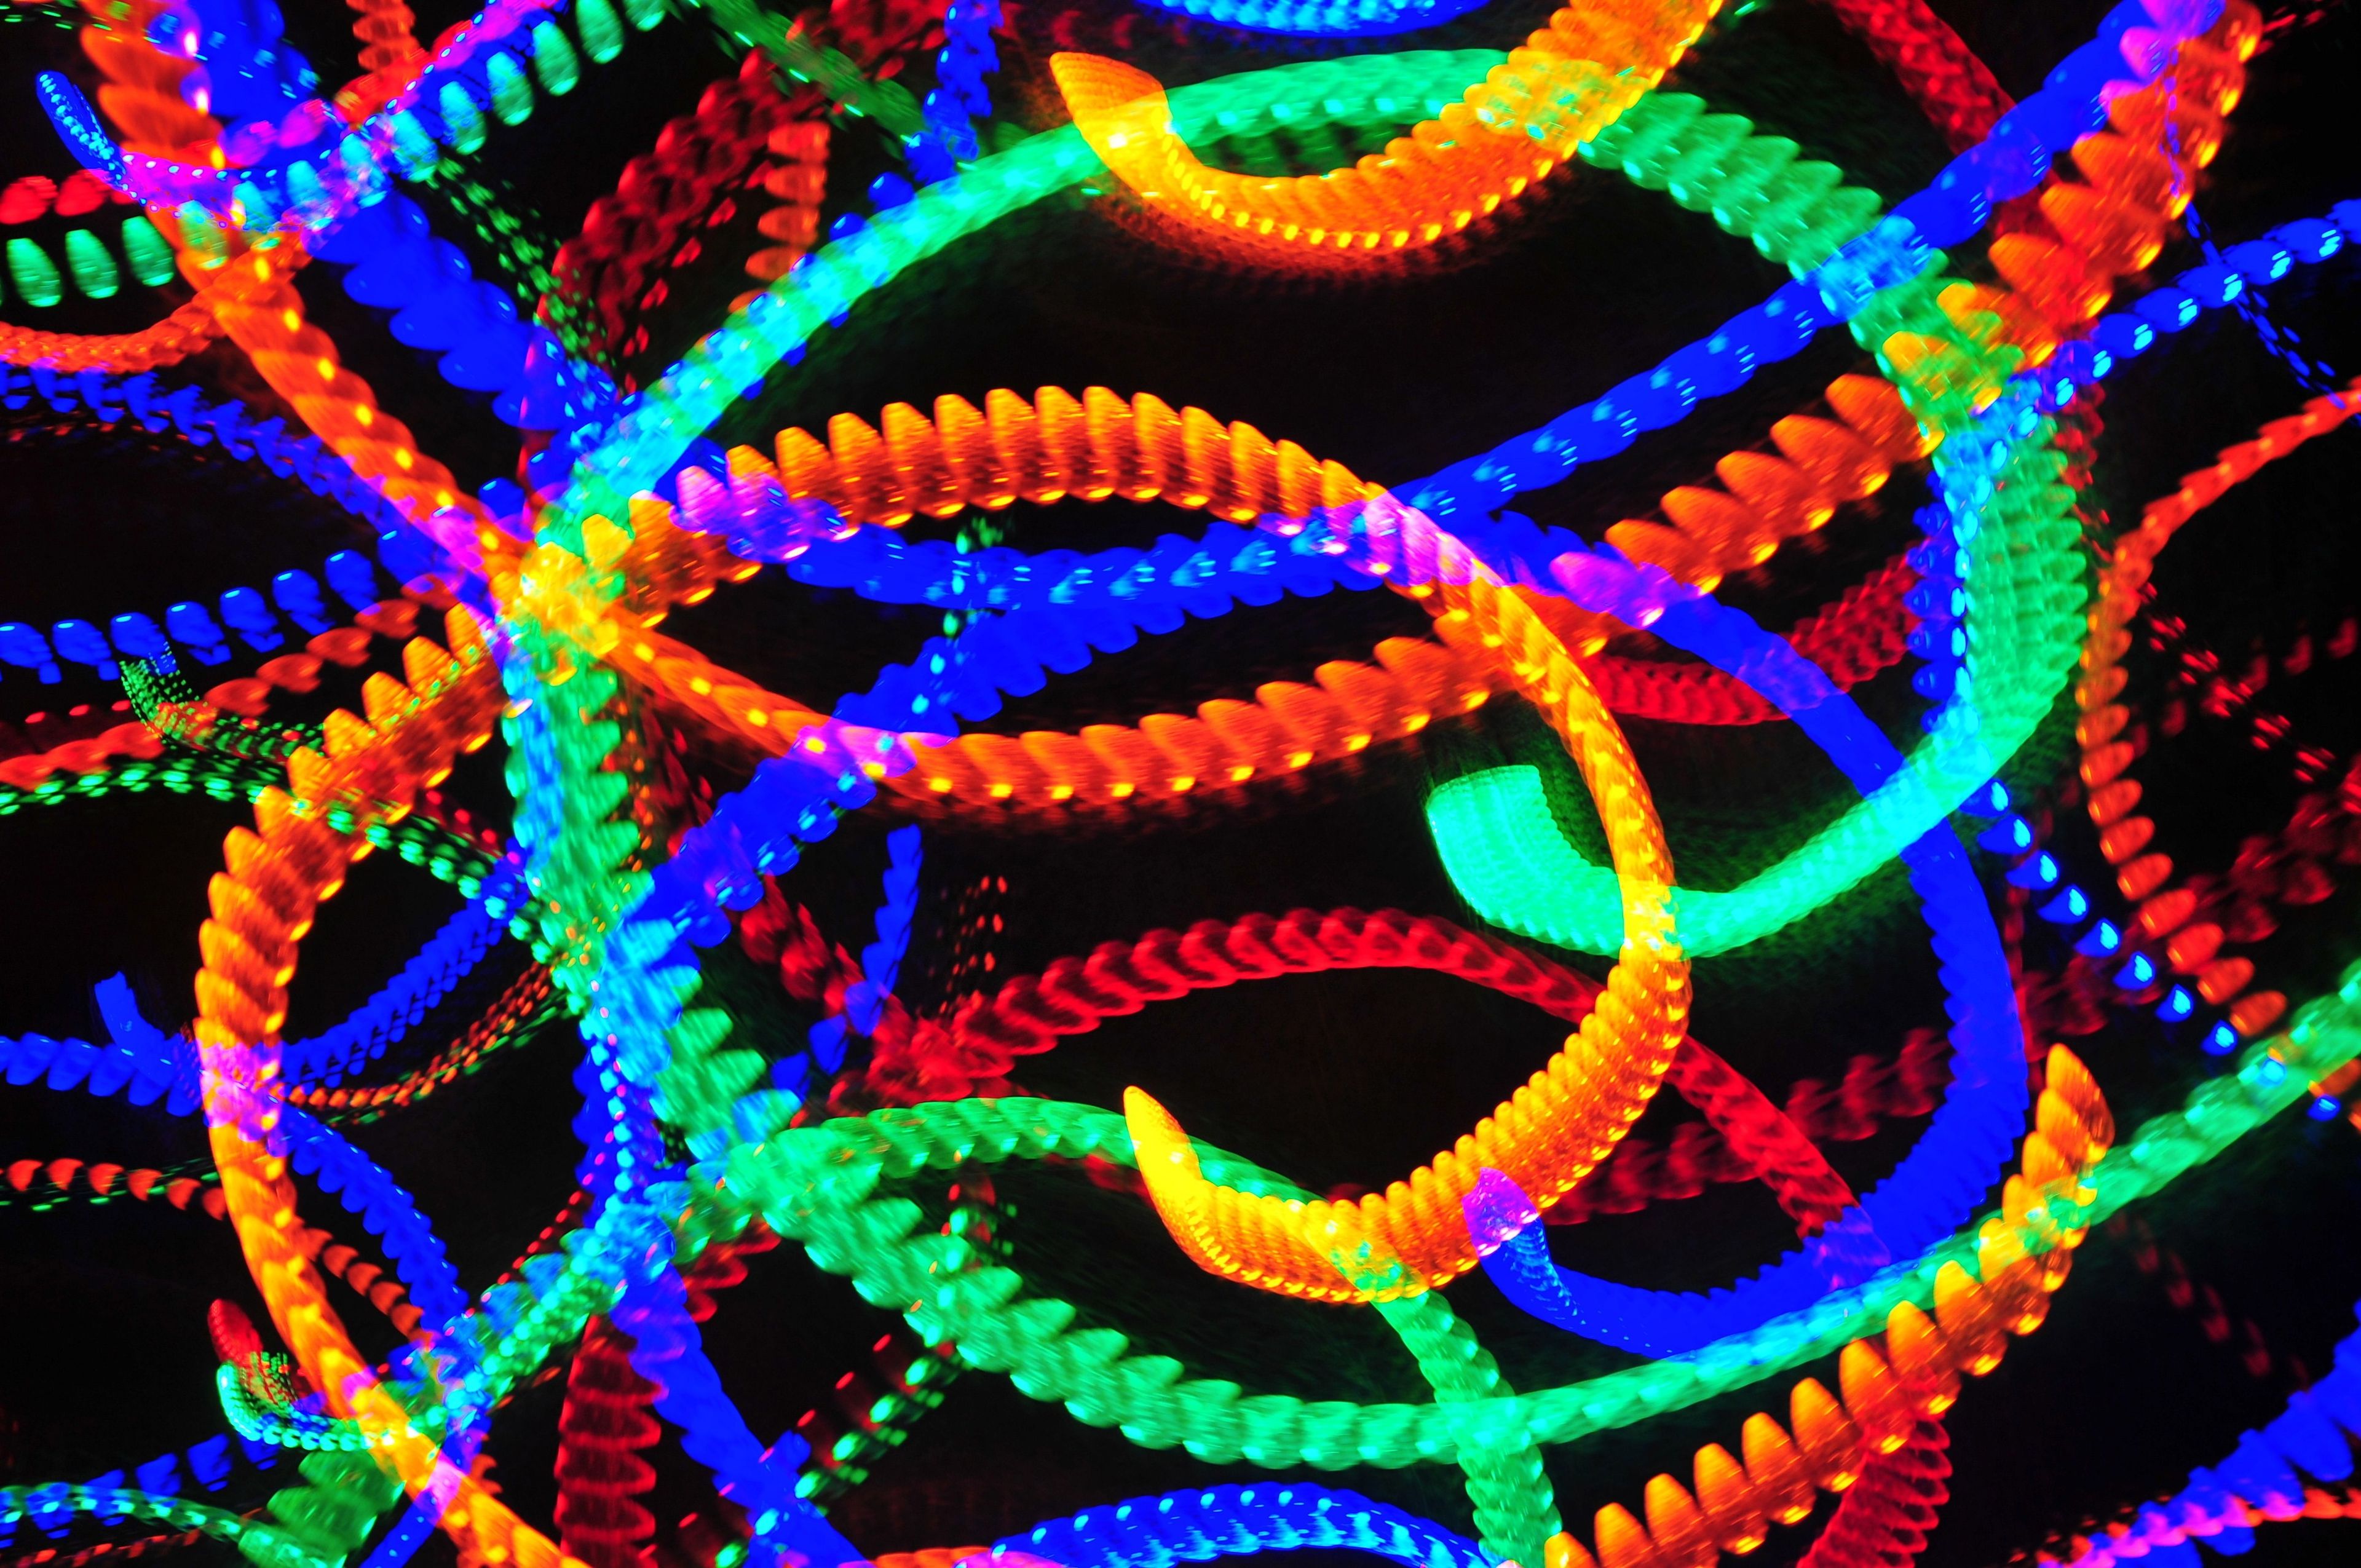 Multicolored lights blurred in long swirls against a black background.